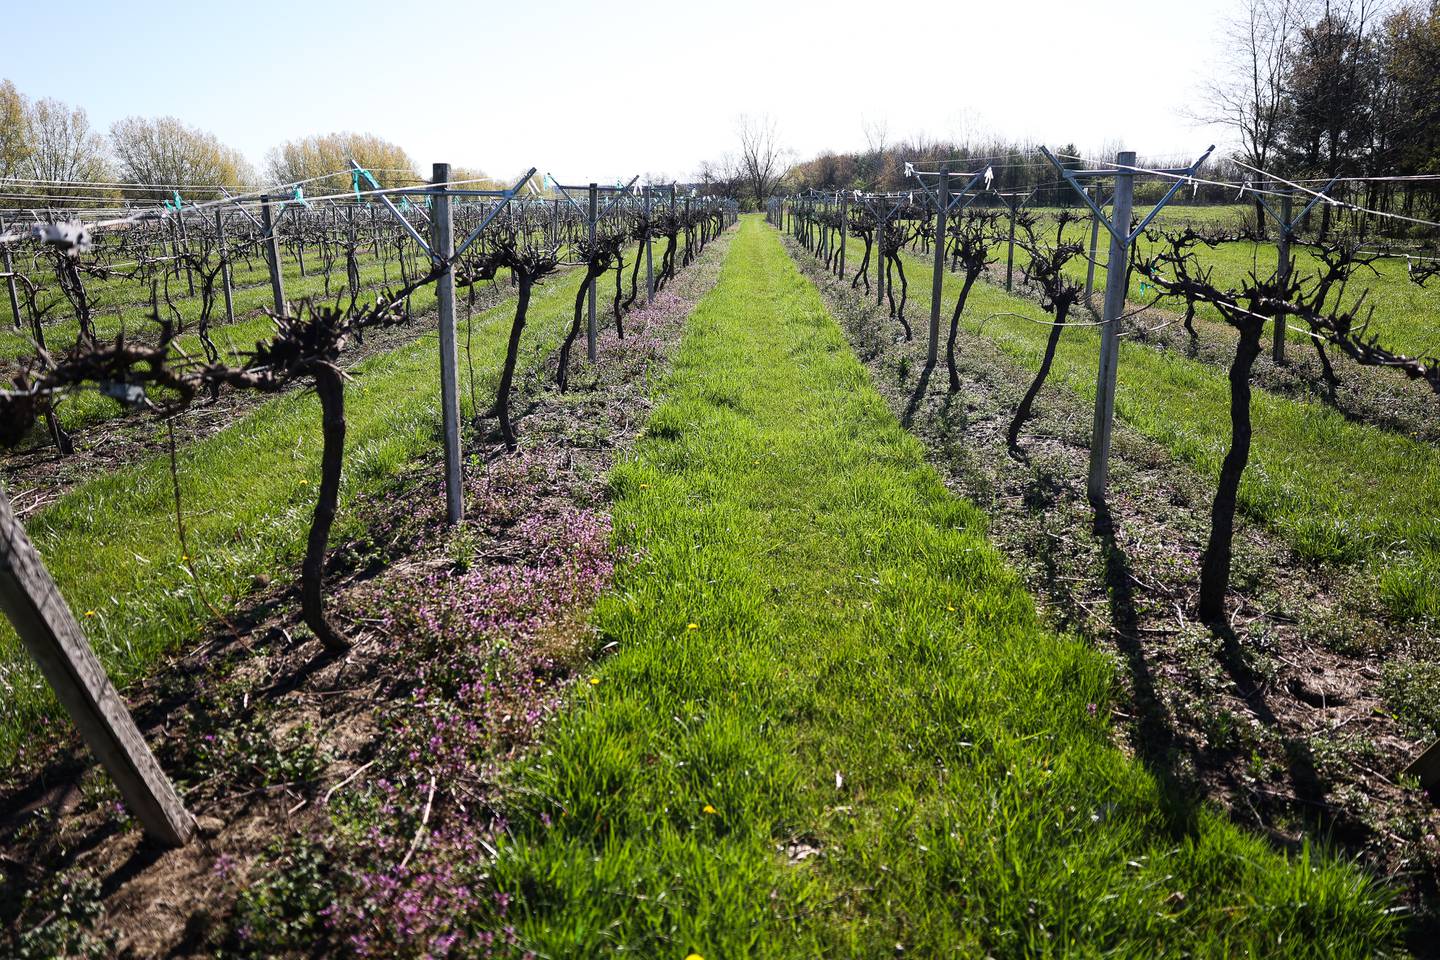 Grapevines stretch arce several acres at Mistie Hill Vineyard on Saturday, April 13 in Custer Park.